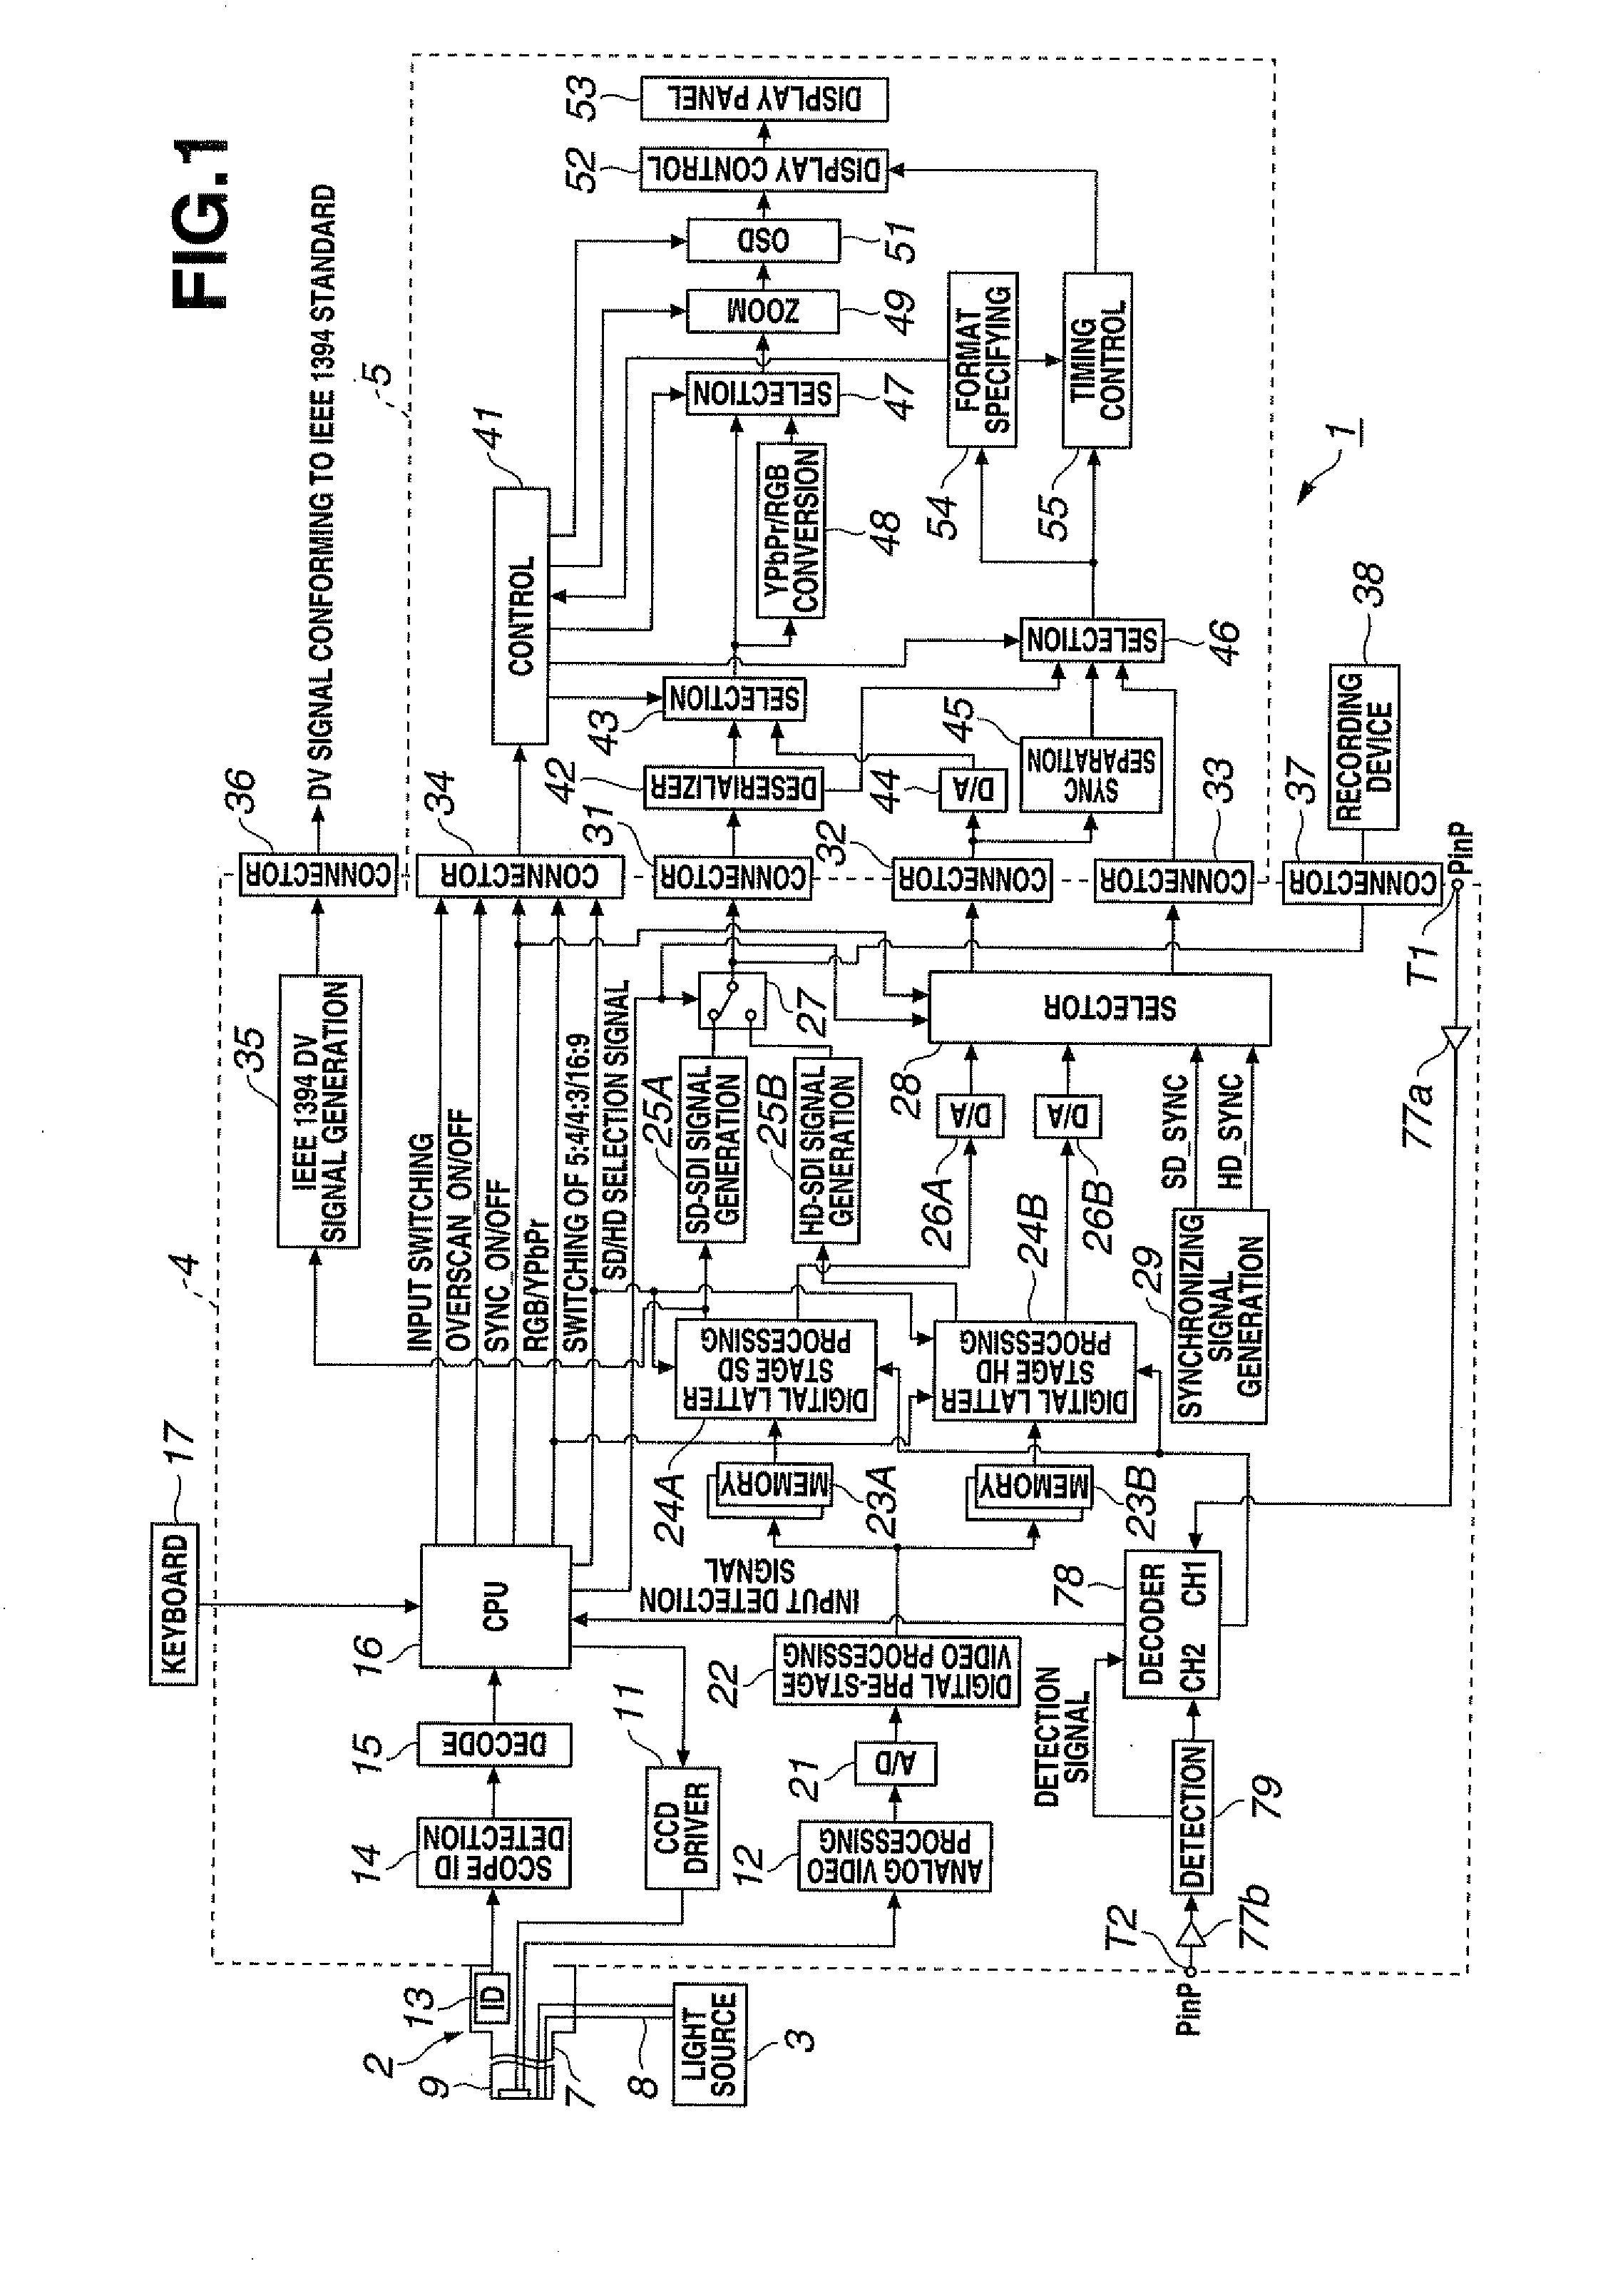 Image processing apparatus for endoscope